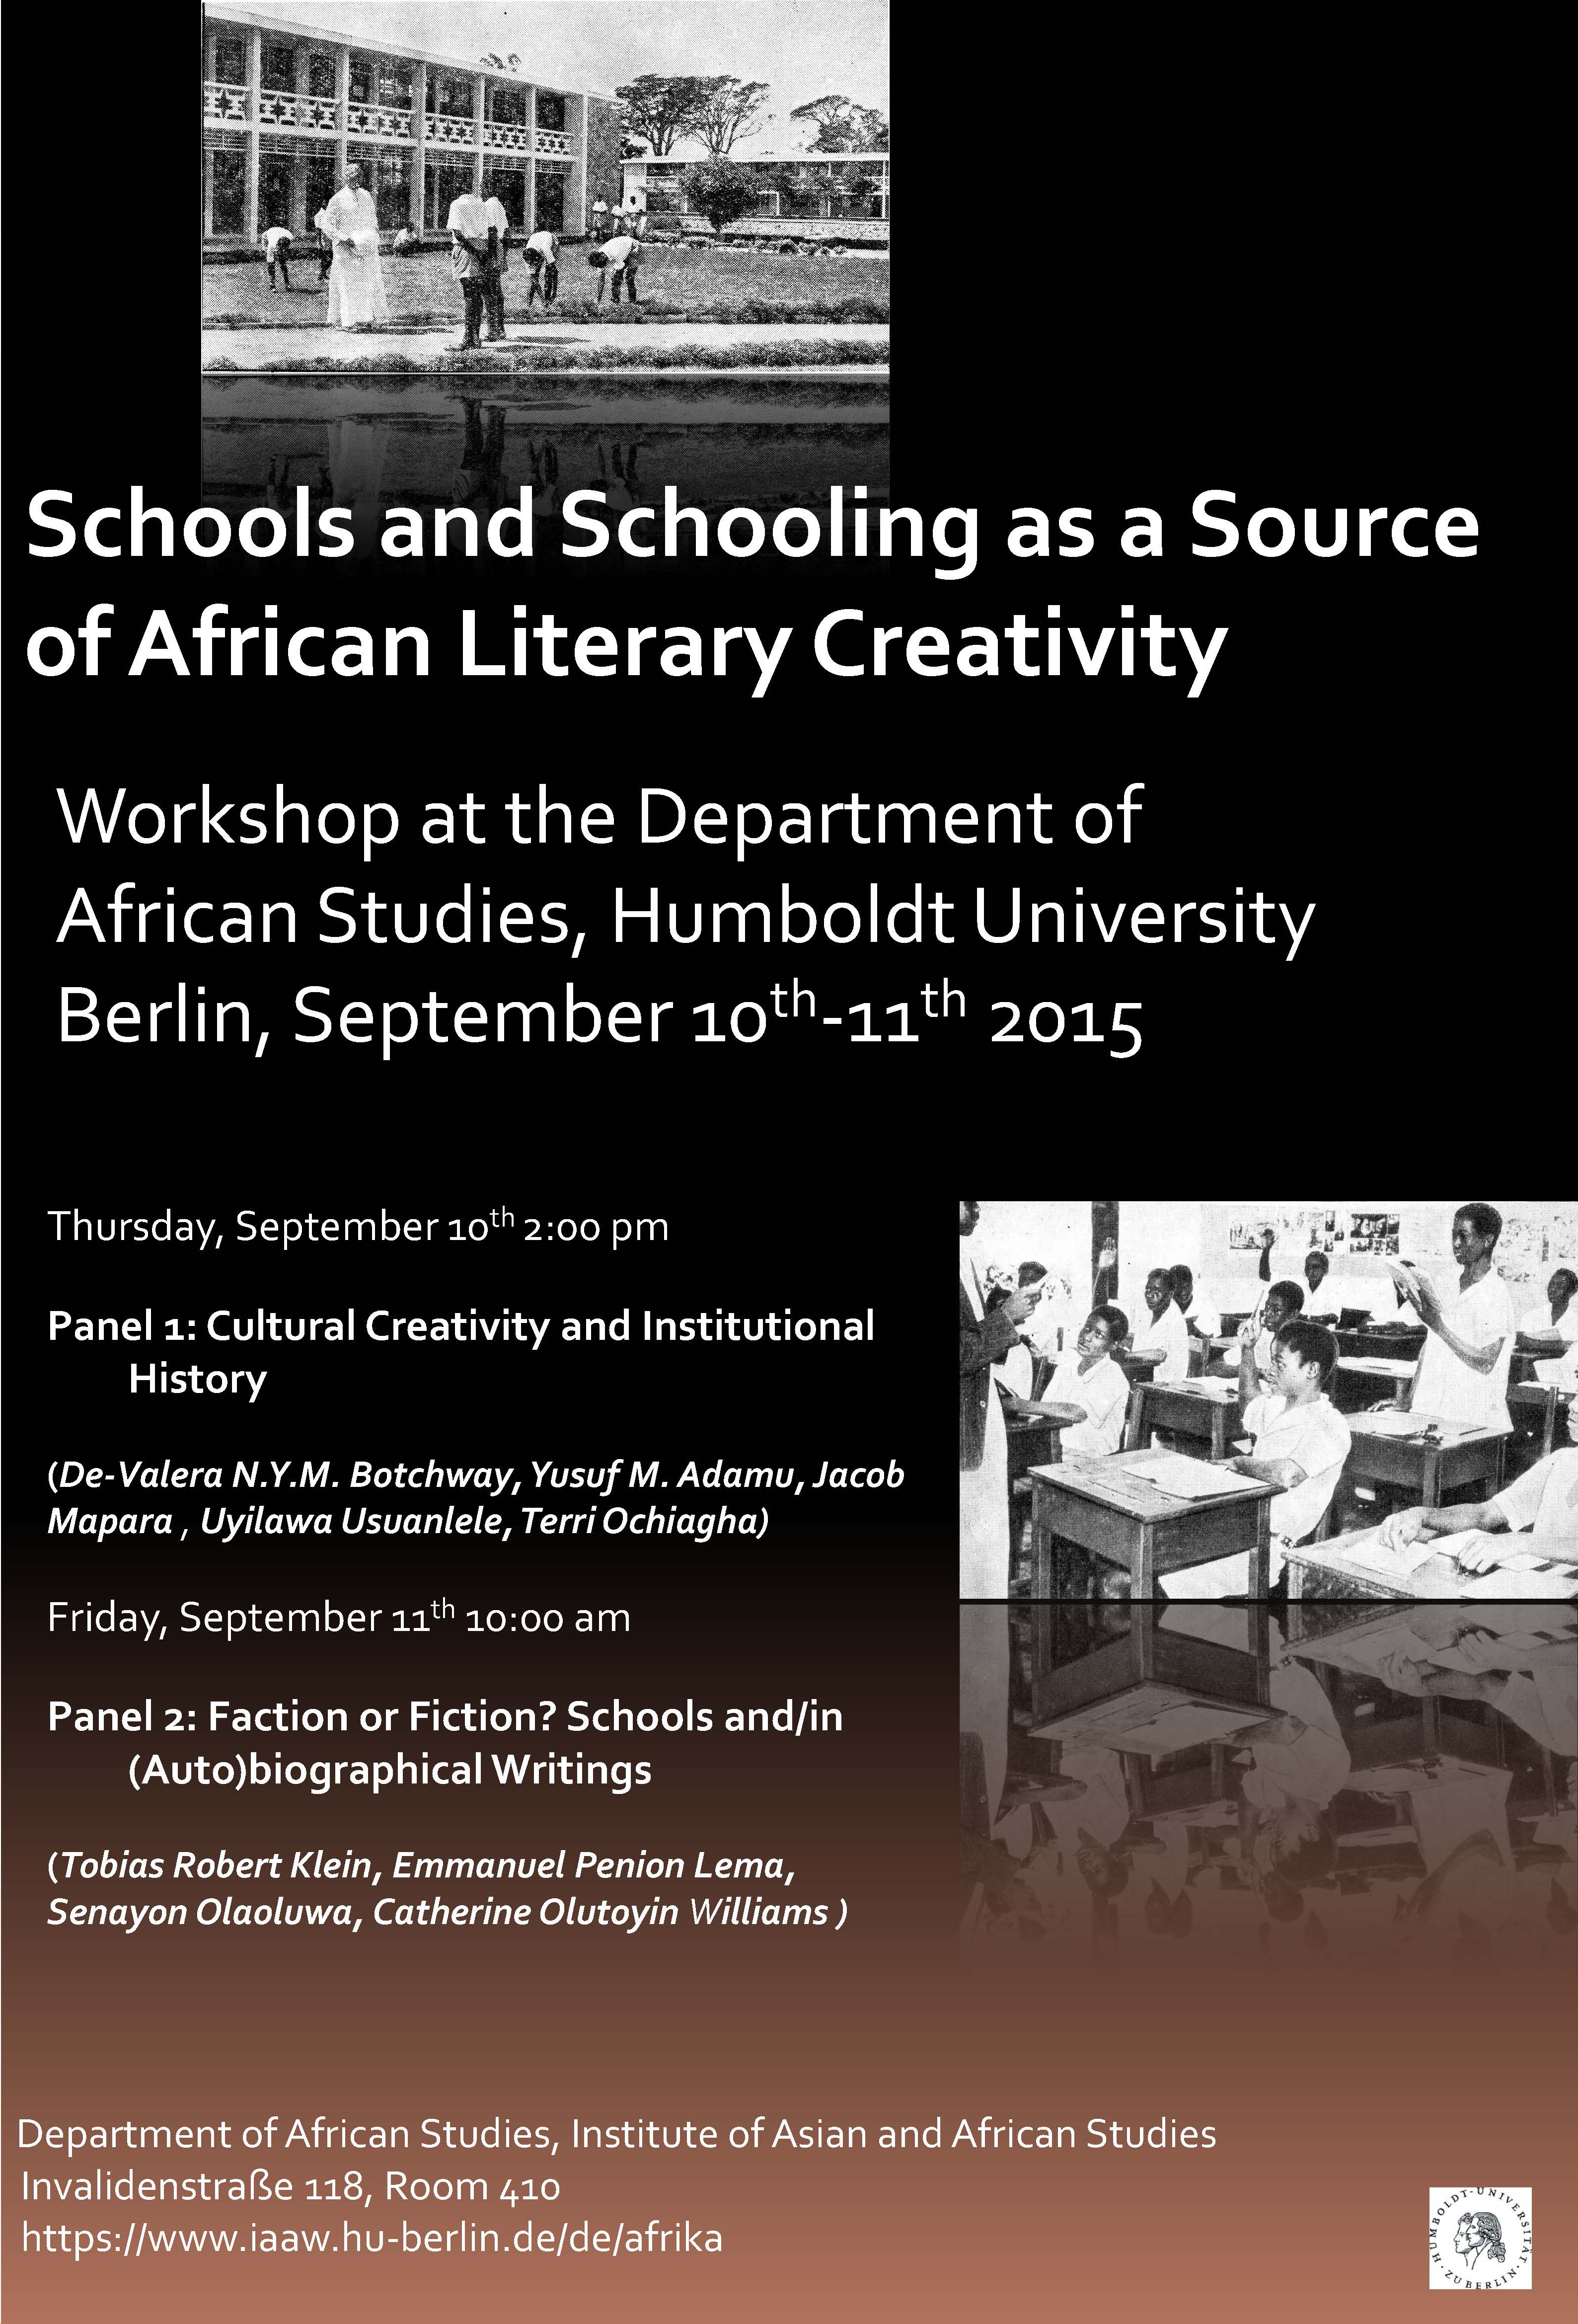 Schools and Schooling as a Source of African Literary and Cultural Creativity 1